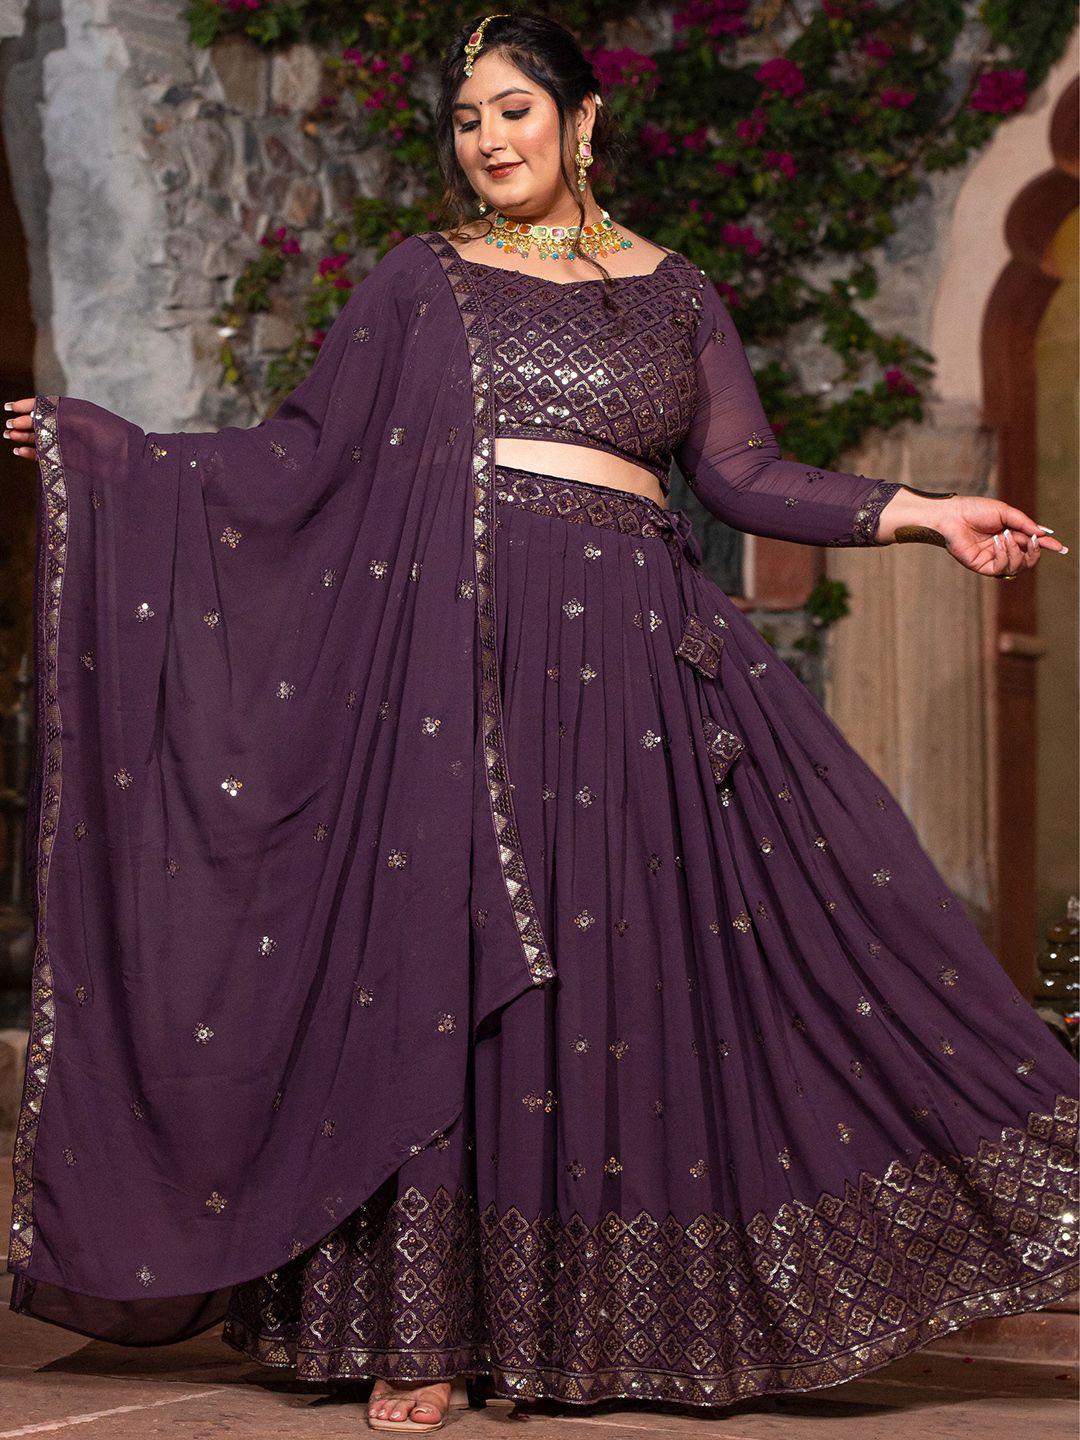 prettyplus by desinoor.com lavender & gold-toned embellished sequinned ready to wear lehenga & blouse with